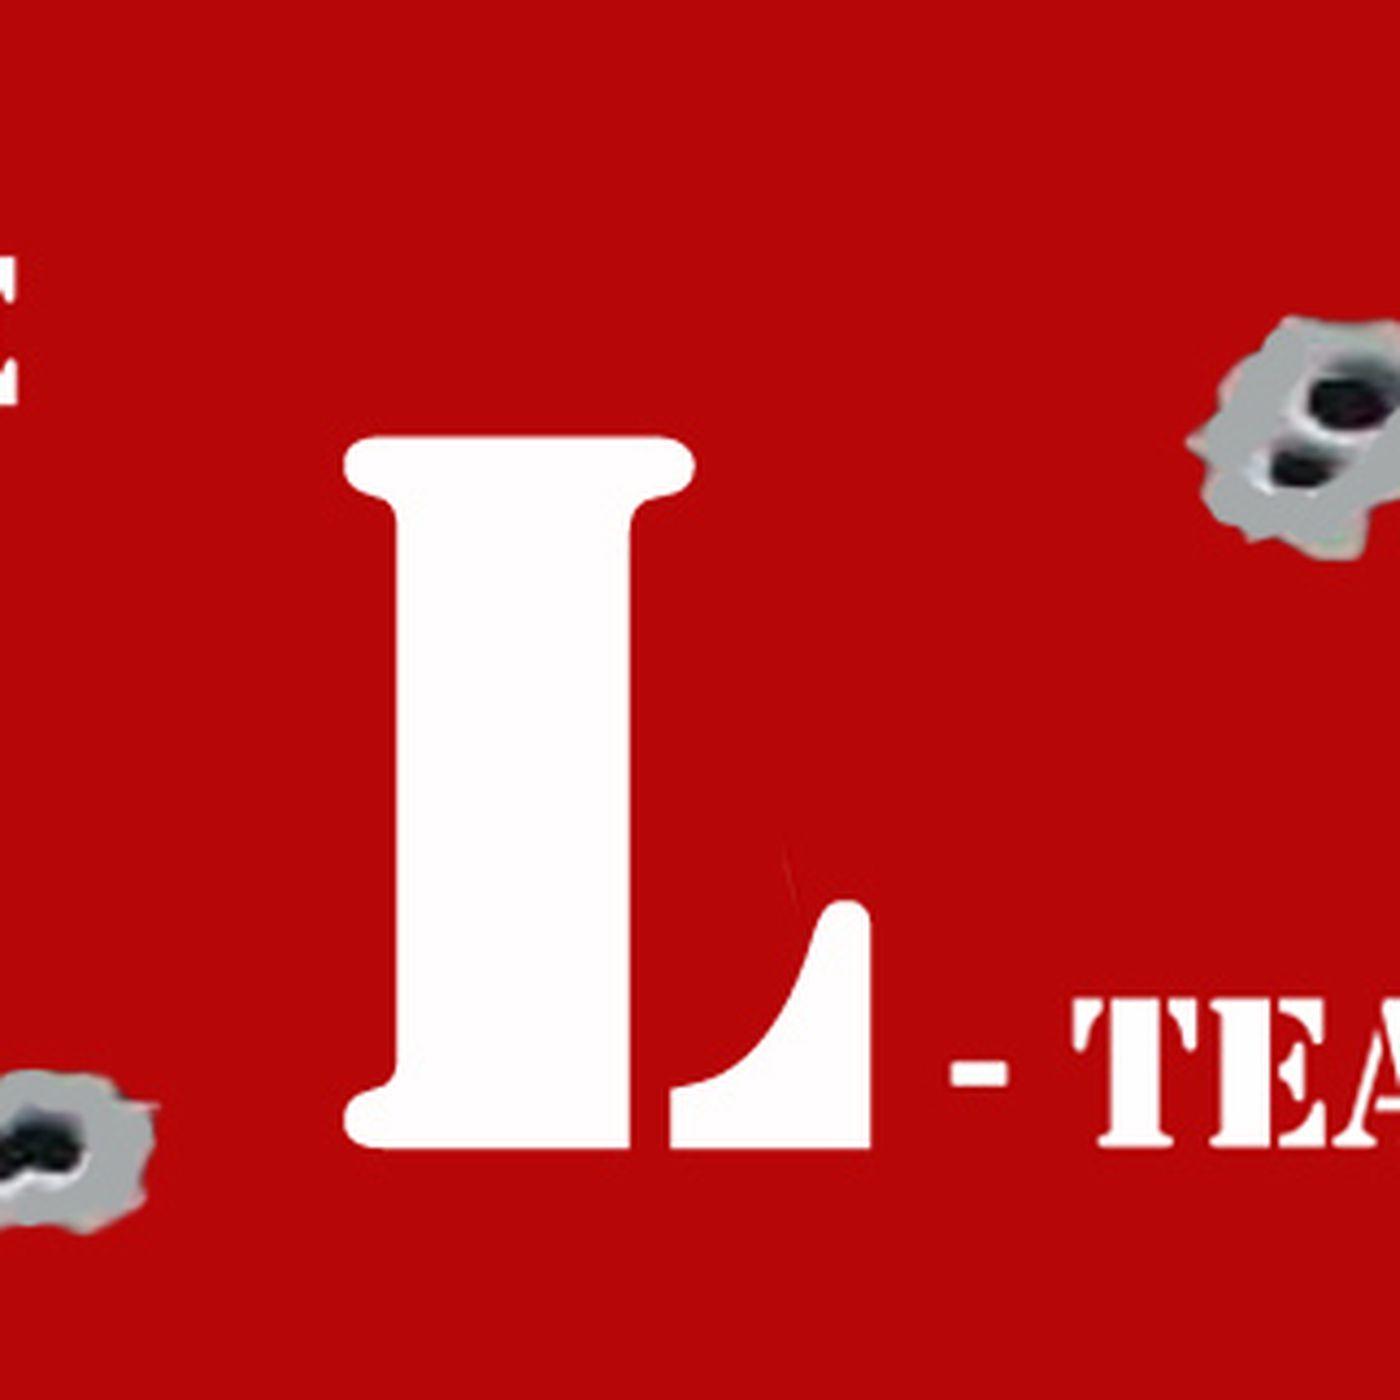 L Team Logo - Meet the L-Team, the most powerful group in Google - The Verge